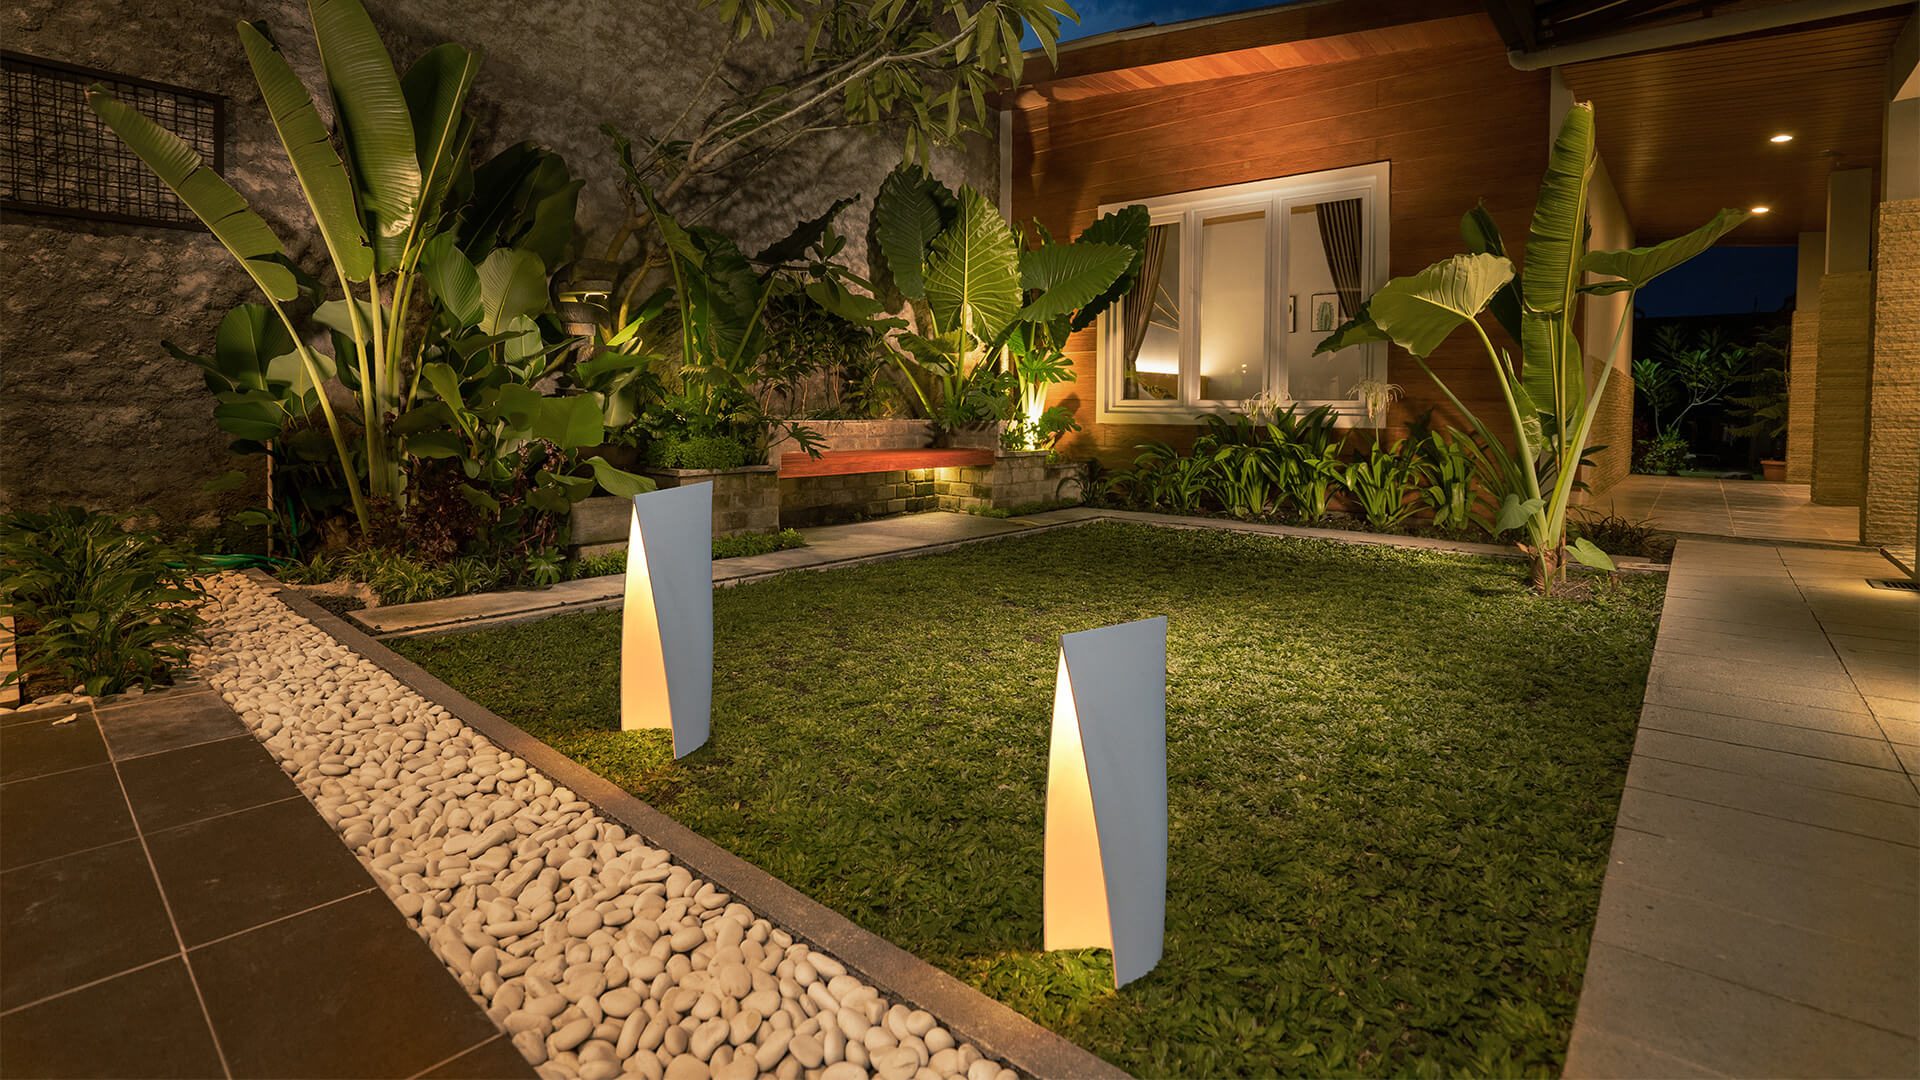 How to light a mediterranean garden with LED lights